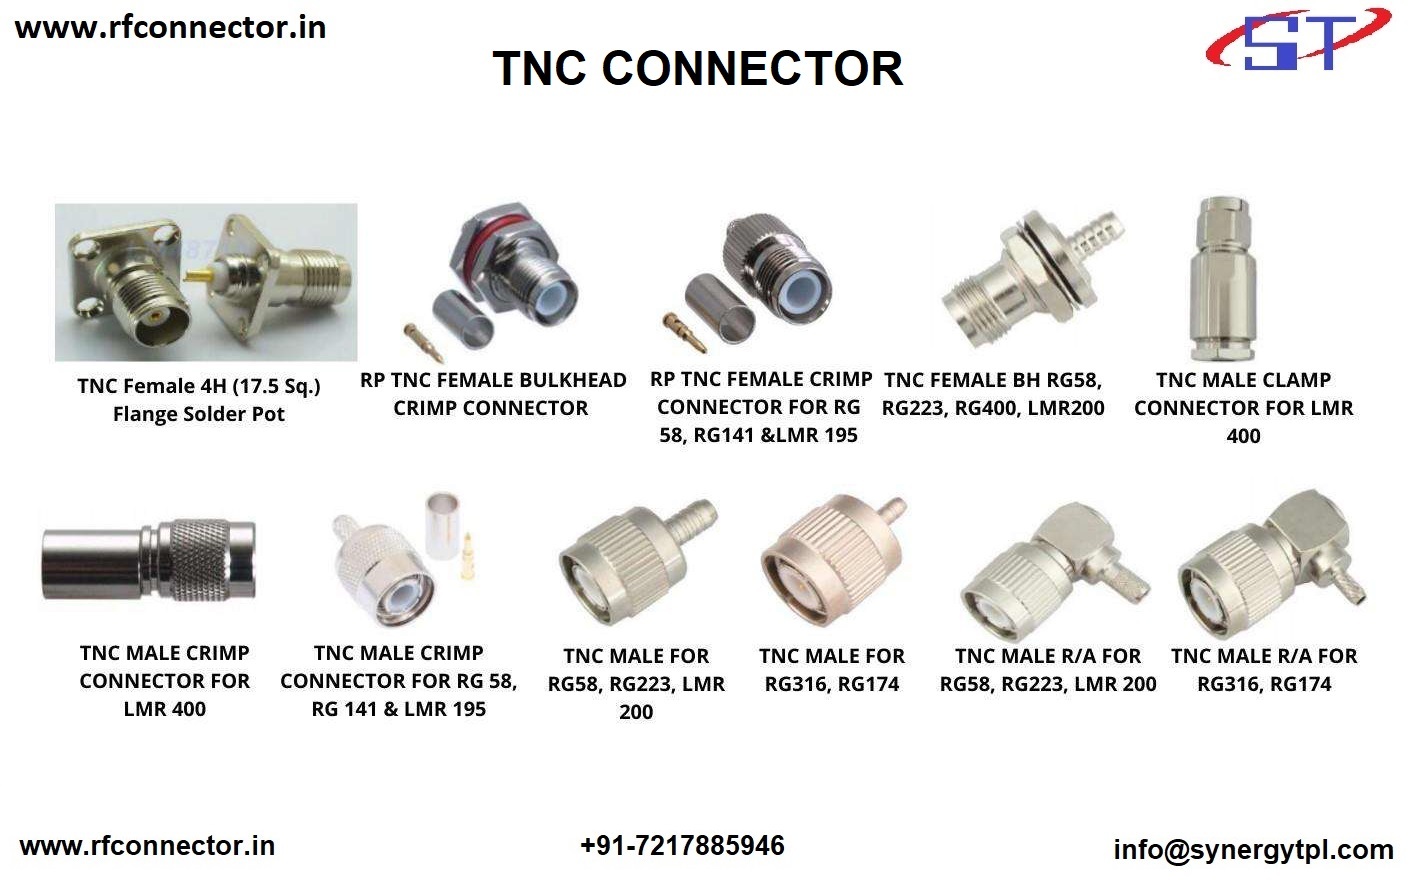 TNC female clamp connector for LMR 400 cable